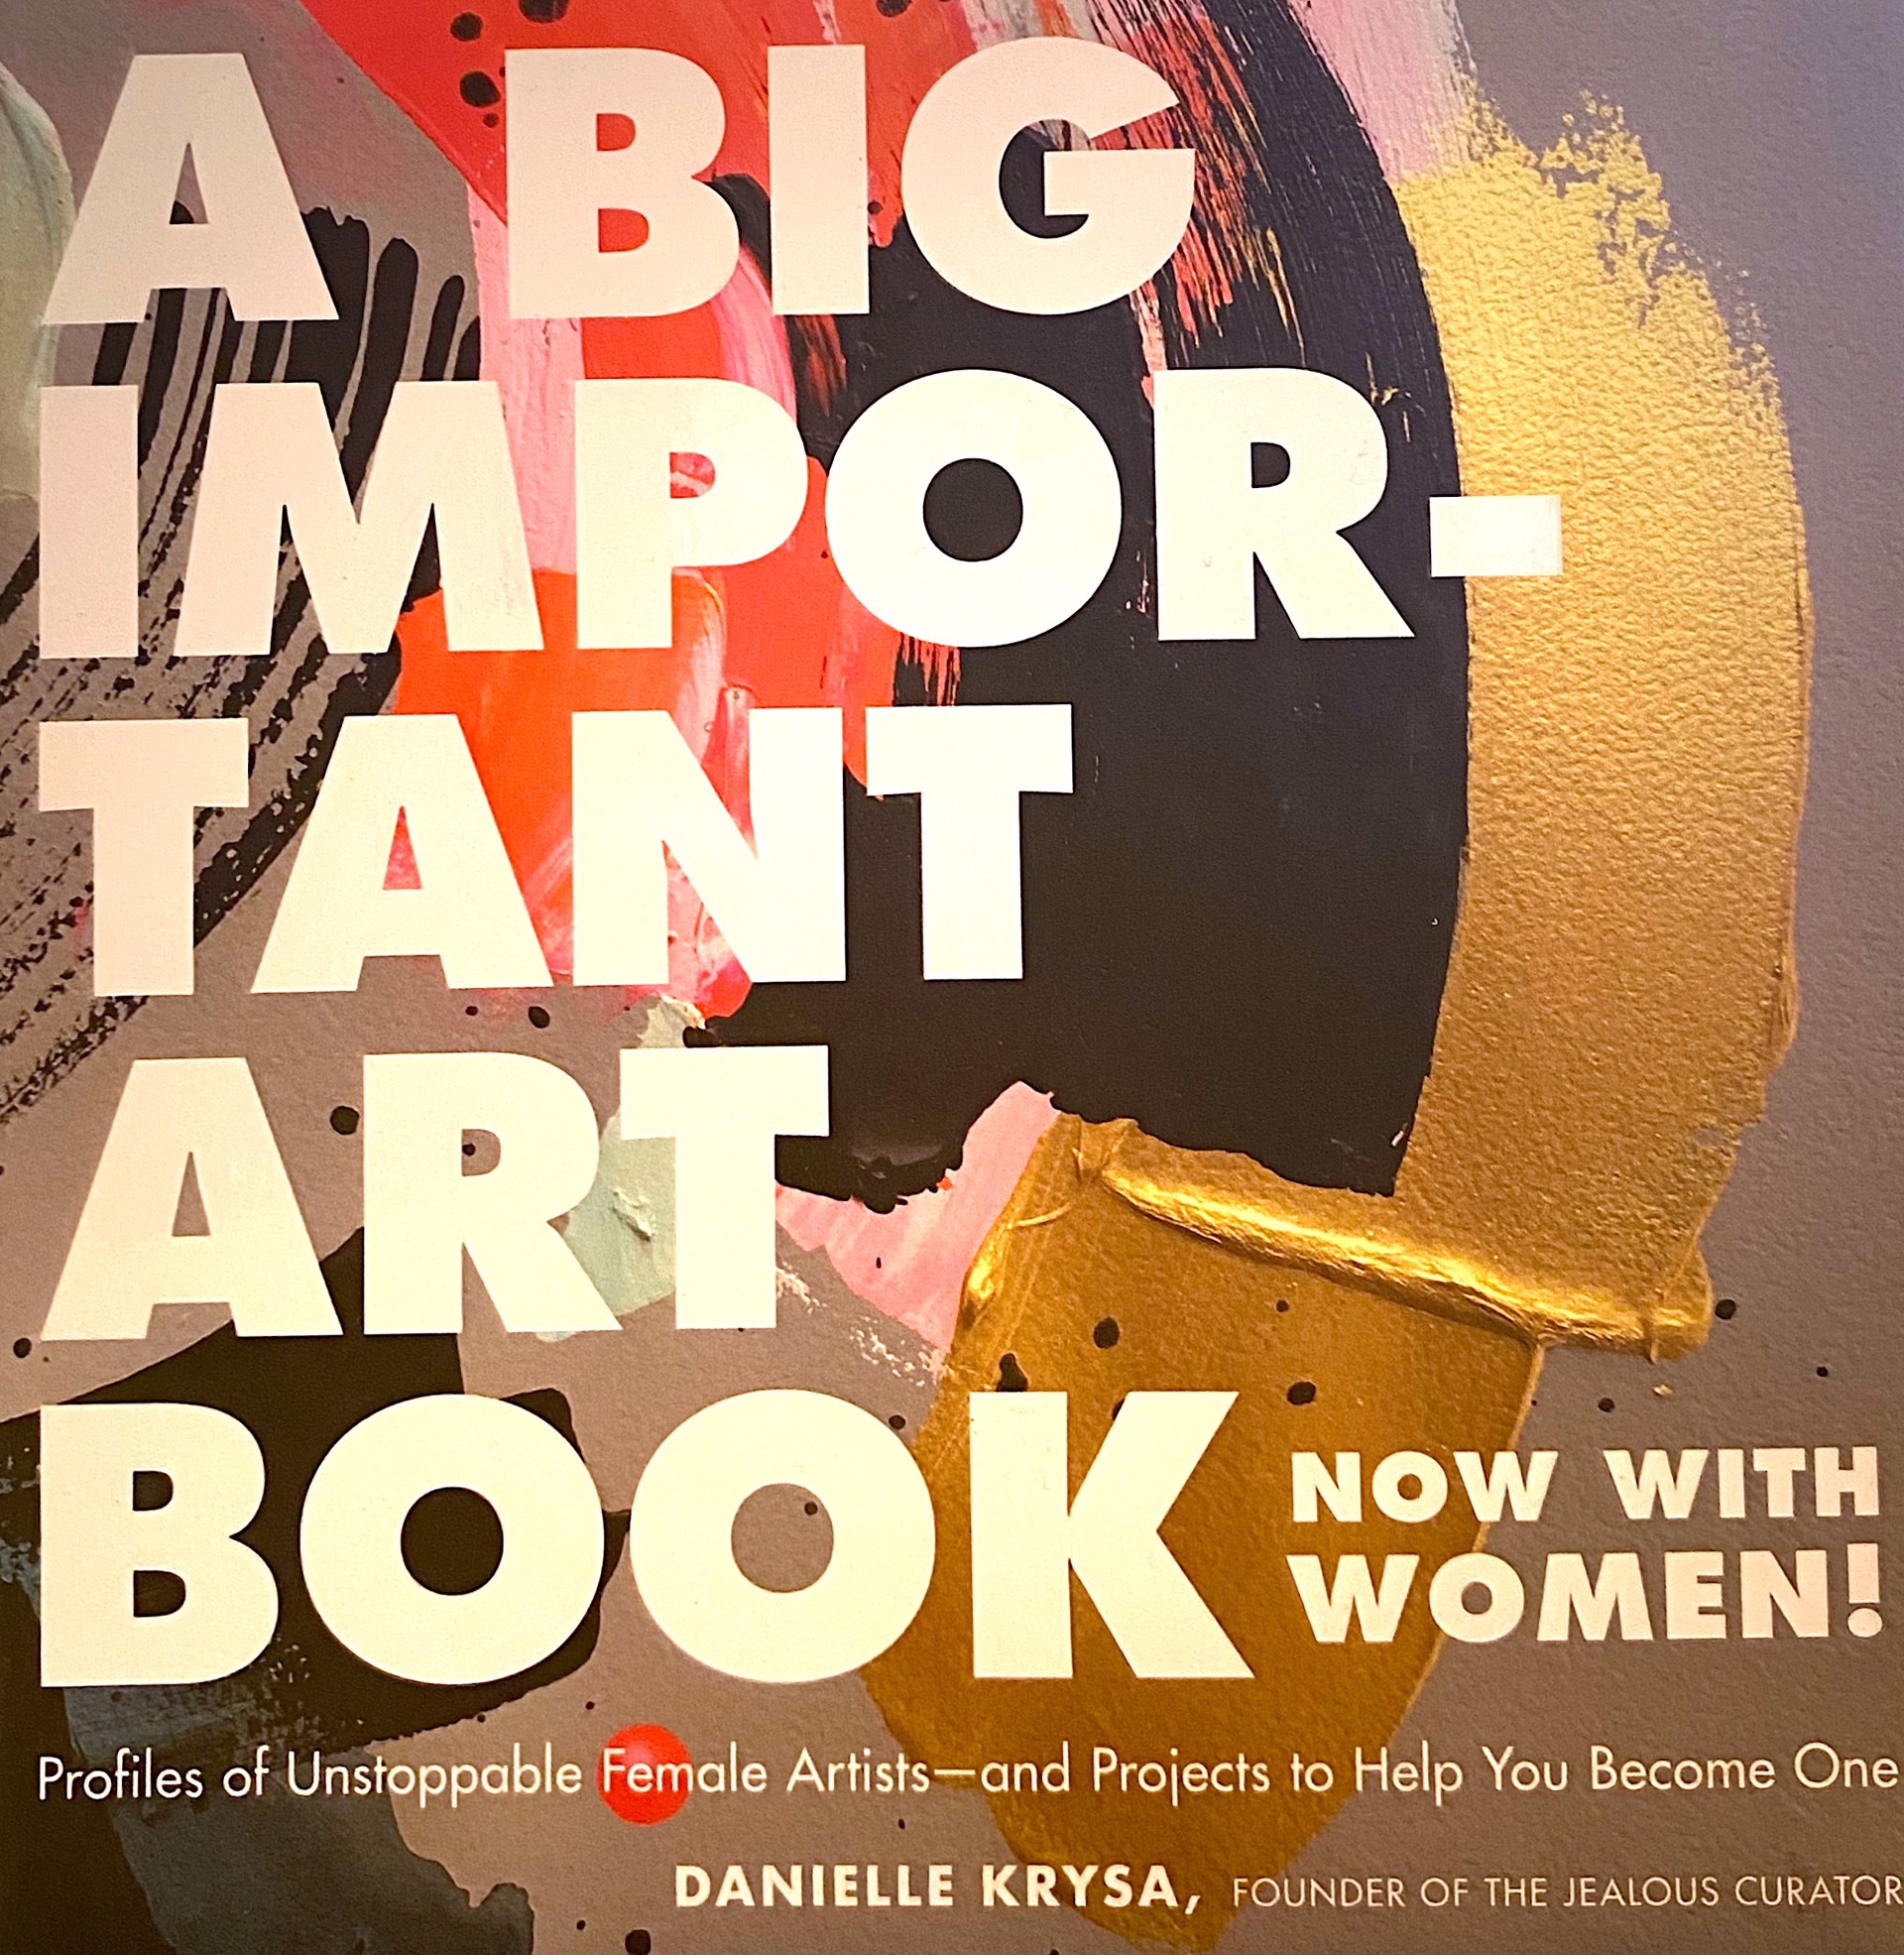 A Big Important Art Book: Now with Women